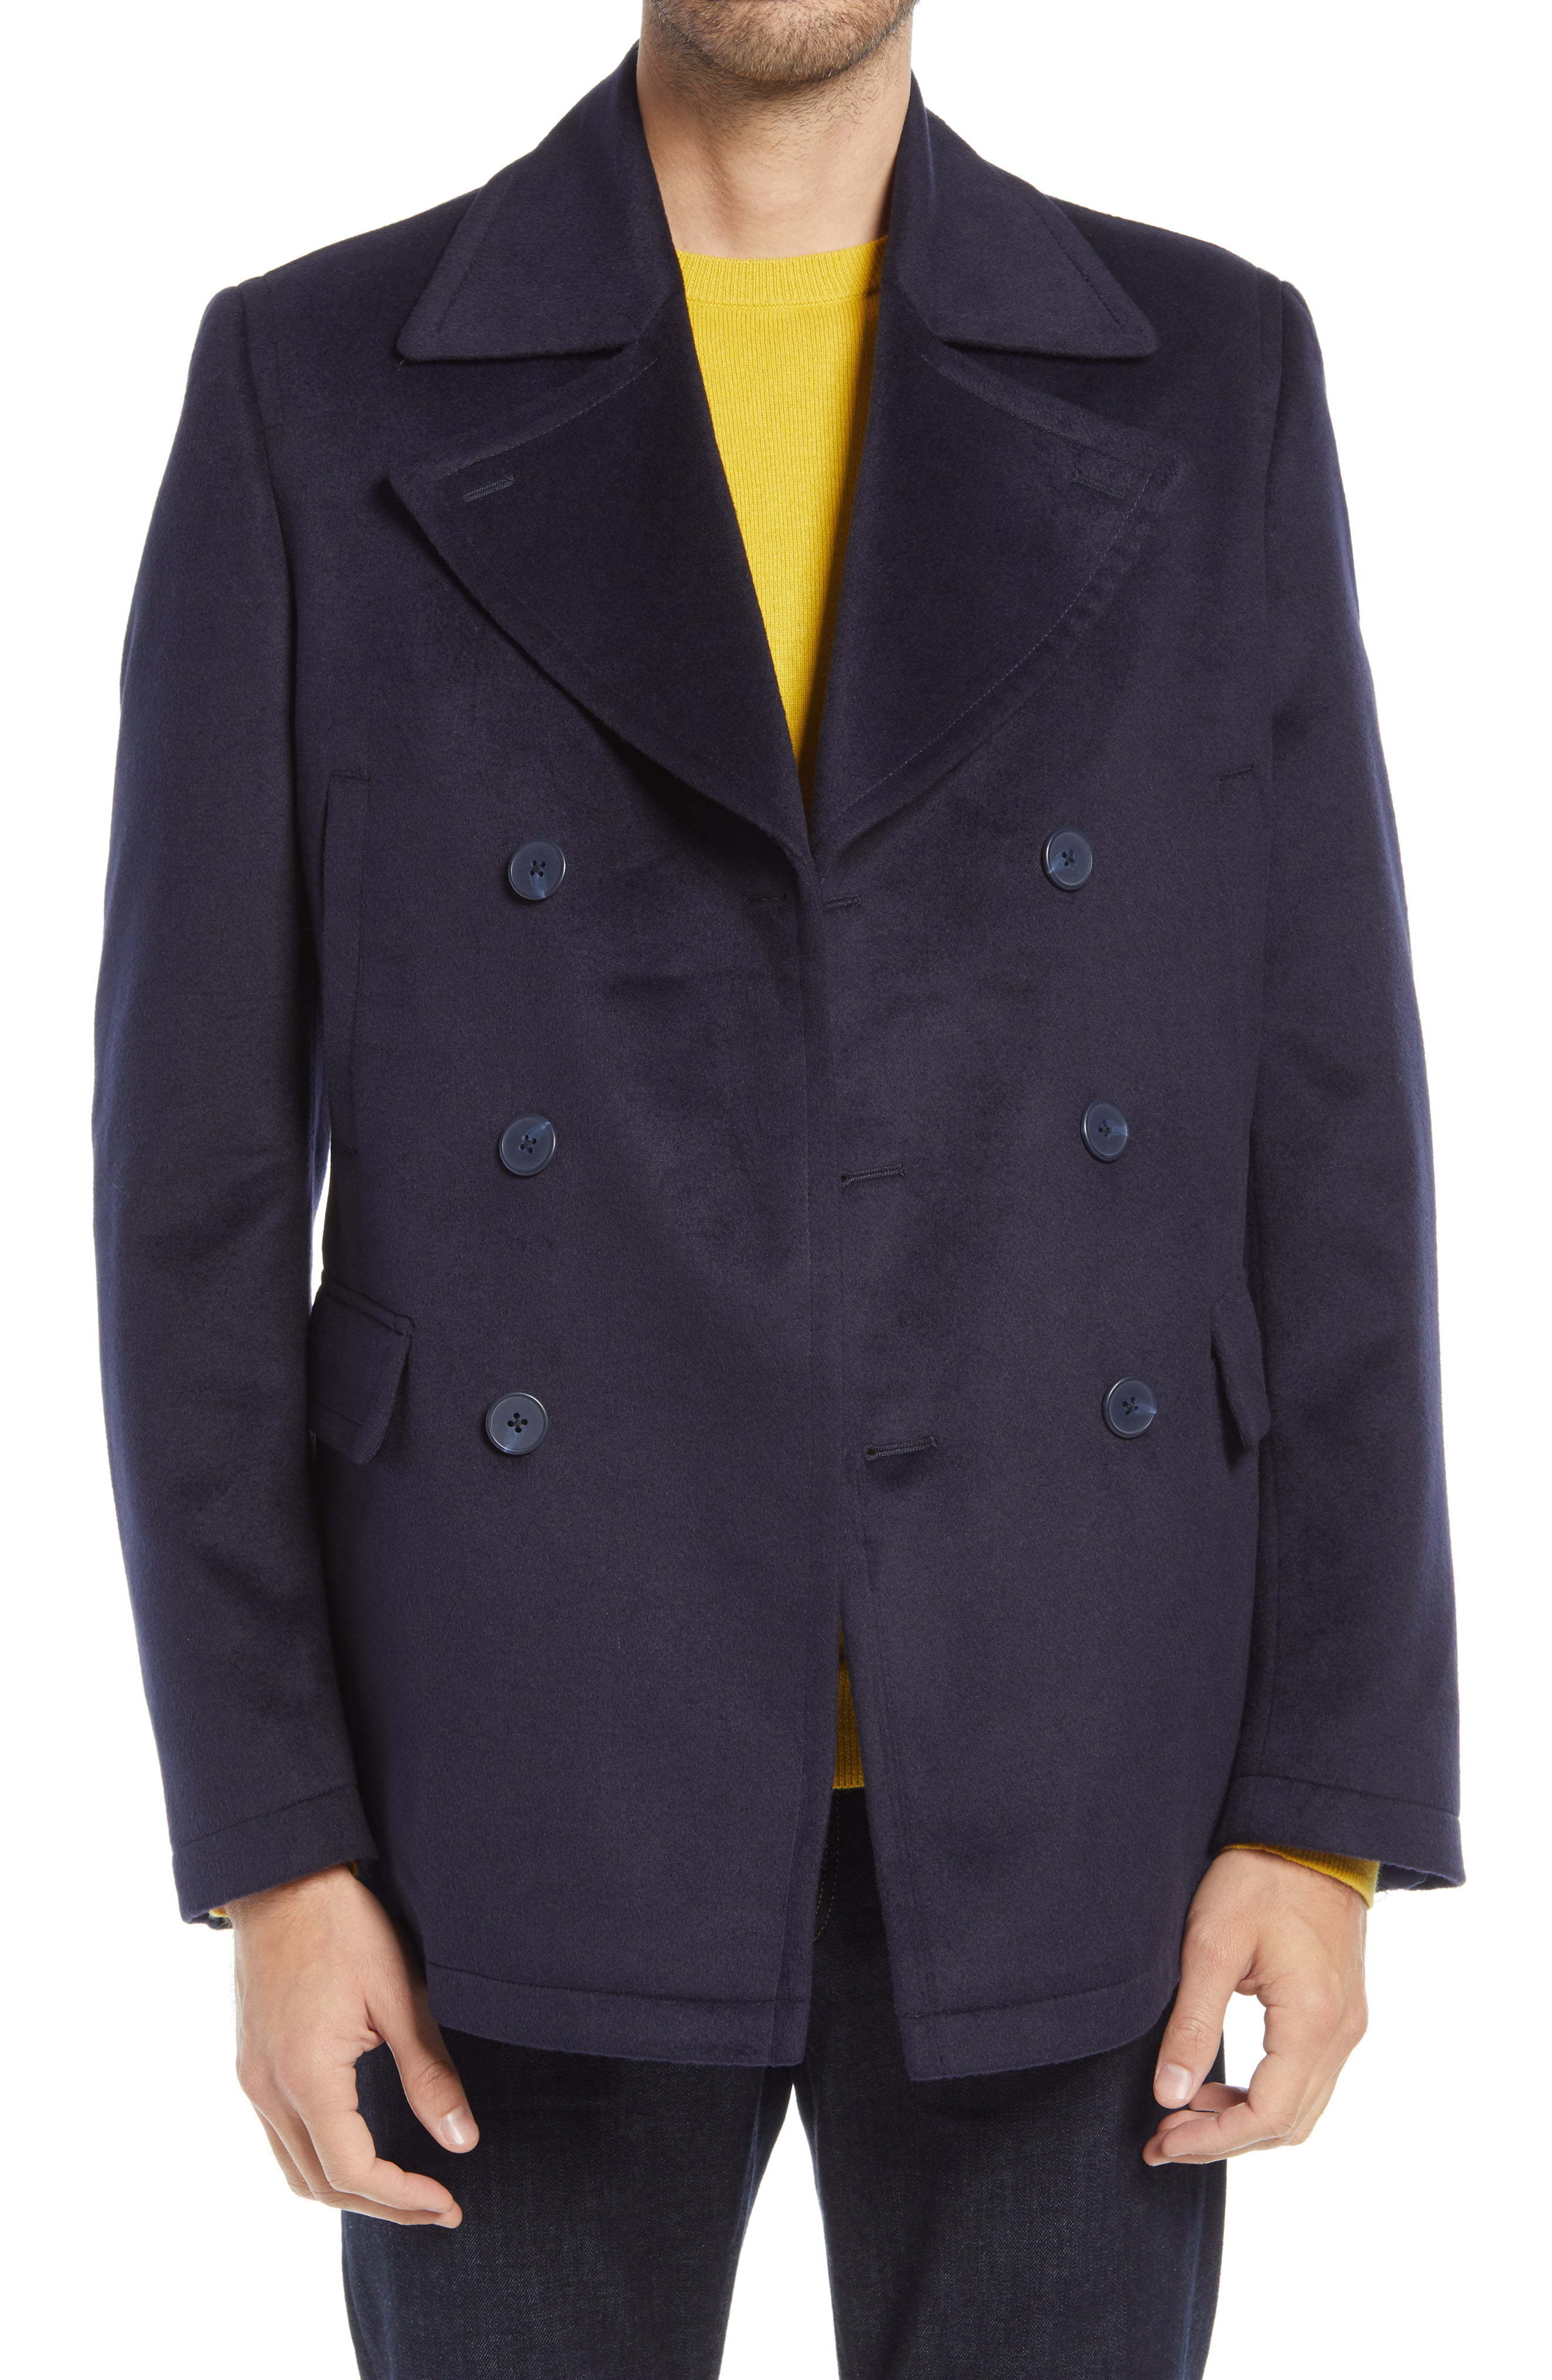 Nordstrom Double Breasted Peacoat, $83 | Nordstrom | Lookastic